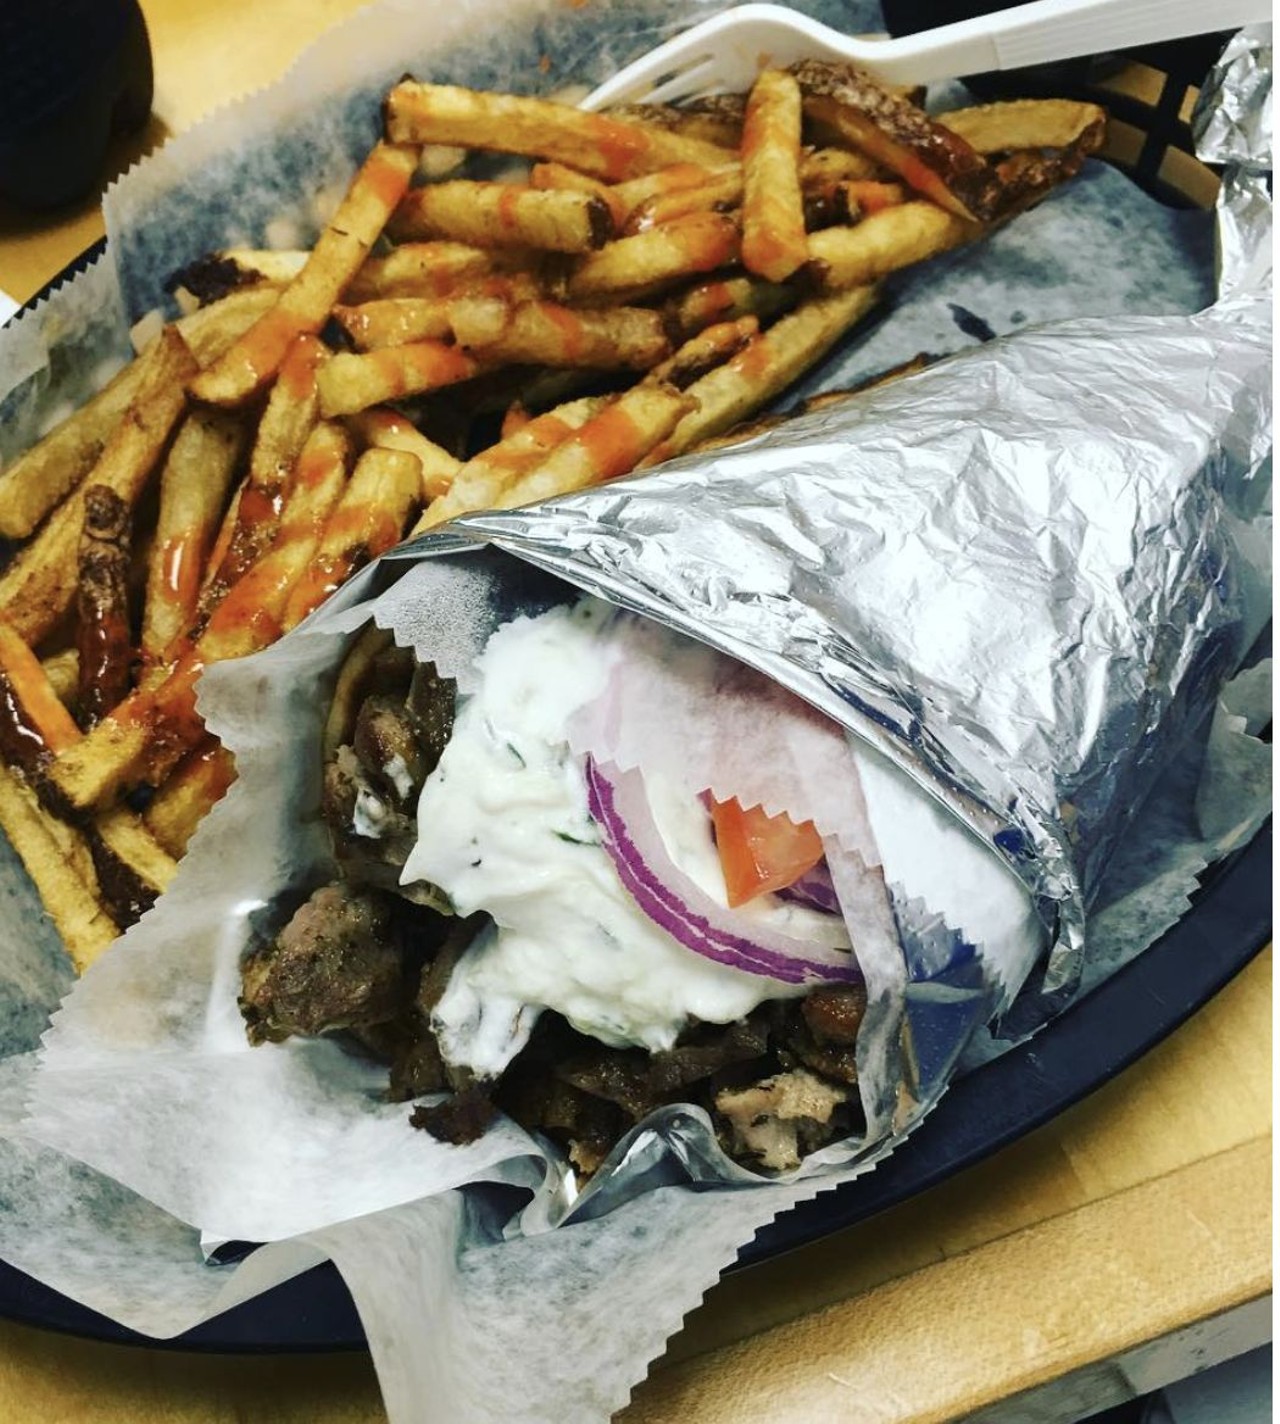  Gyro from Greek Village Grille
Multiple Locations
But in this case, the bread is warm pita, the meat is seasoned lamb and beef, standing in for the veggies are tomatoes and onion, and that sauce is a refreshing yogurt-cucumber blend.
Photo via @SashDDavenport/Instagram